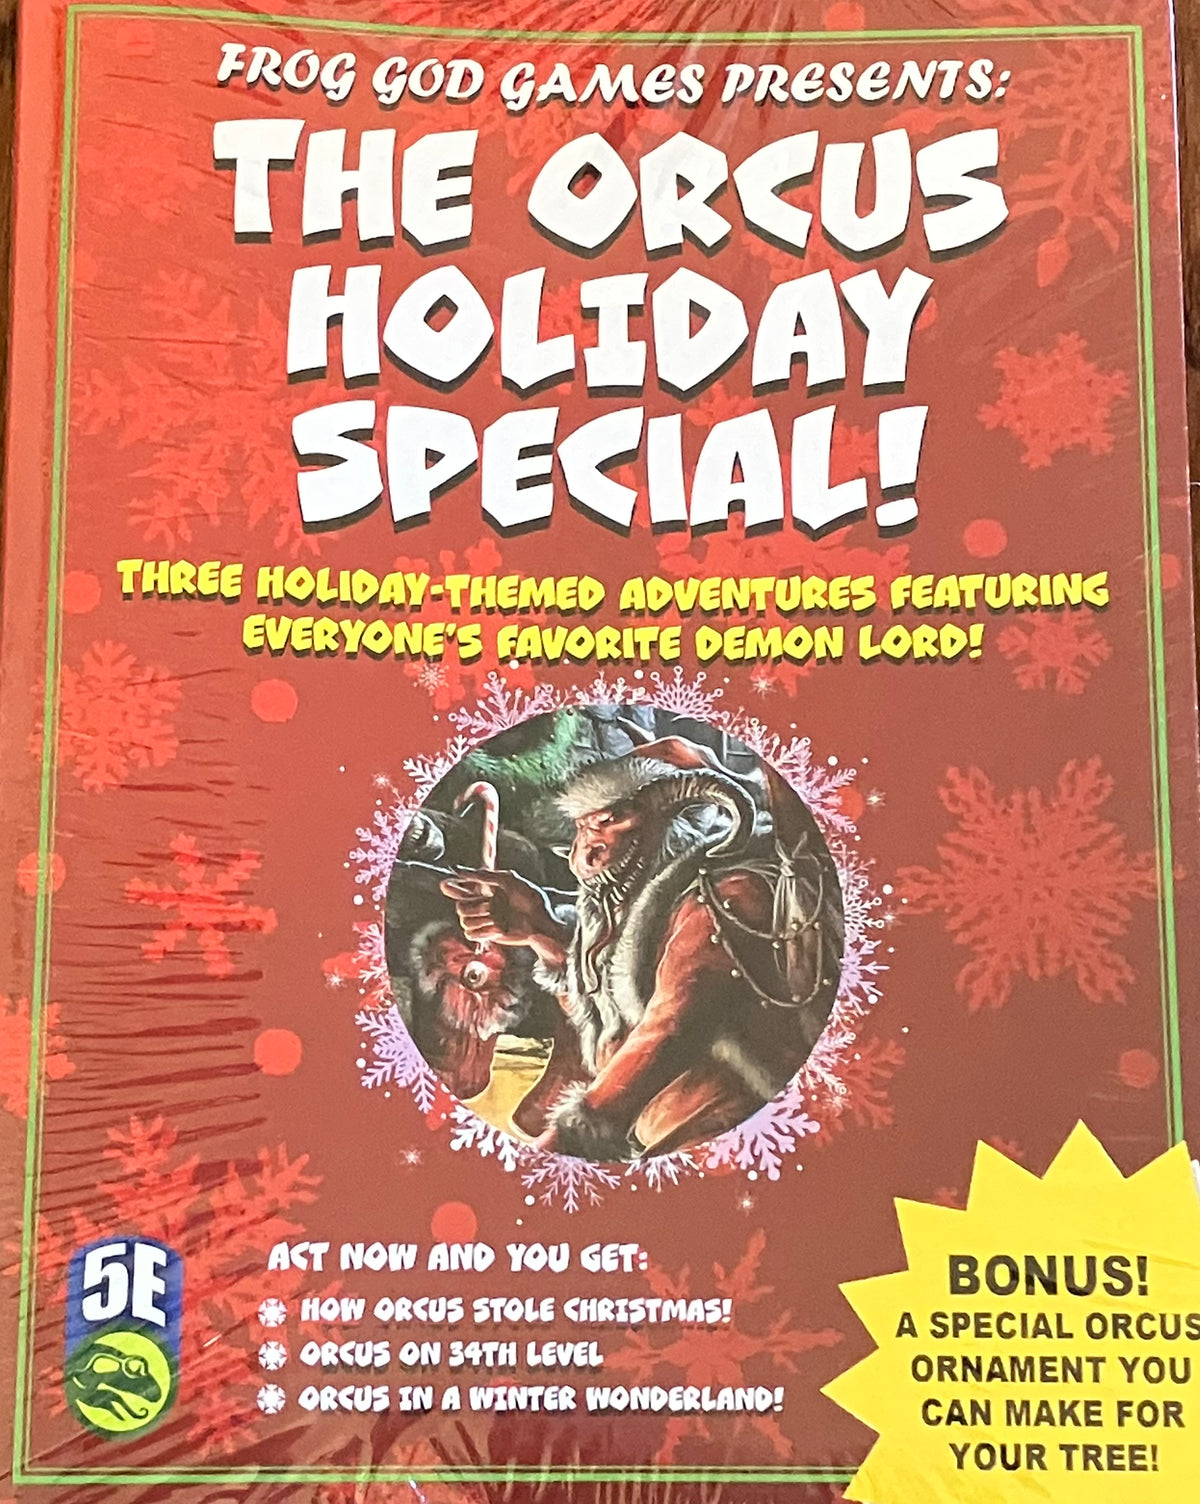 The Orcus Holiday Special!